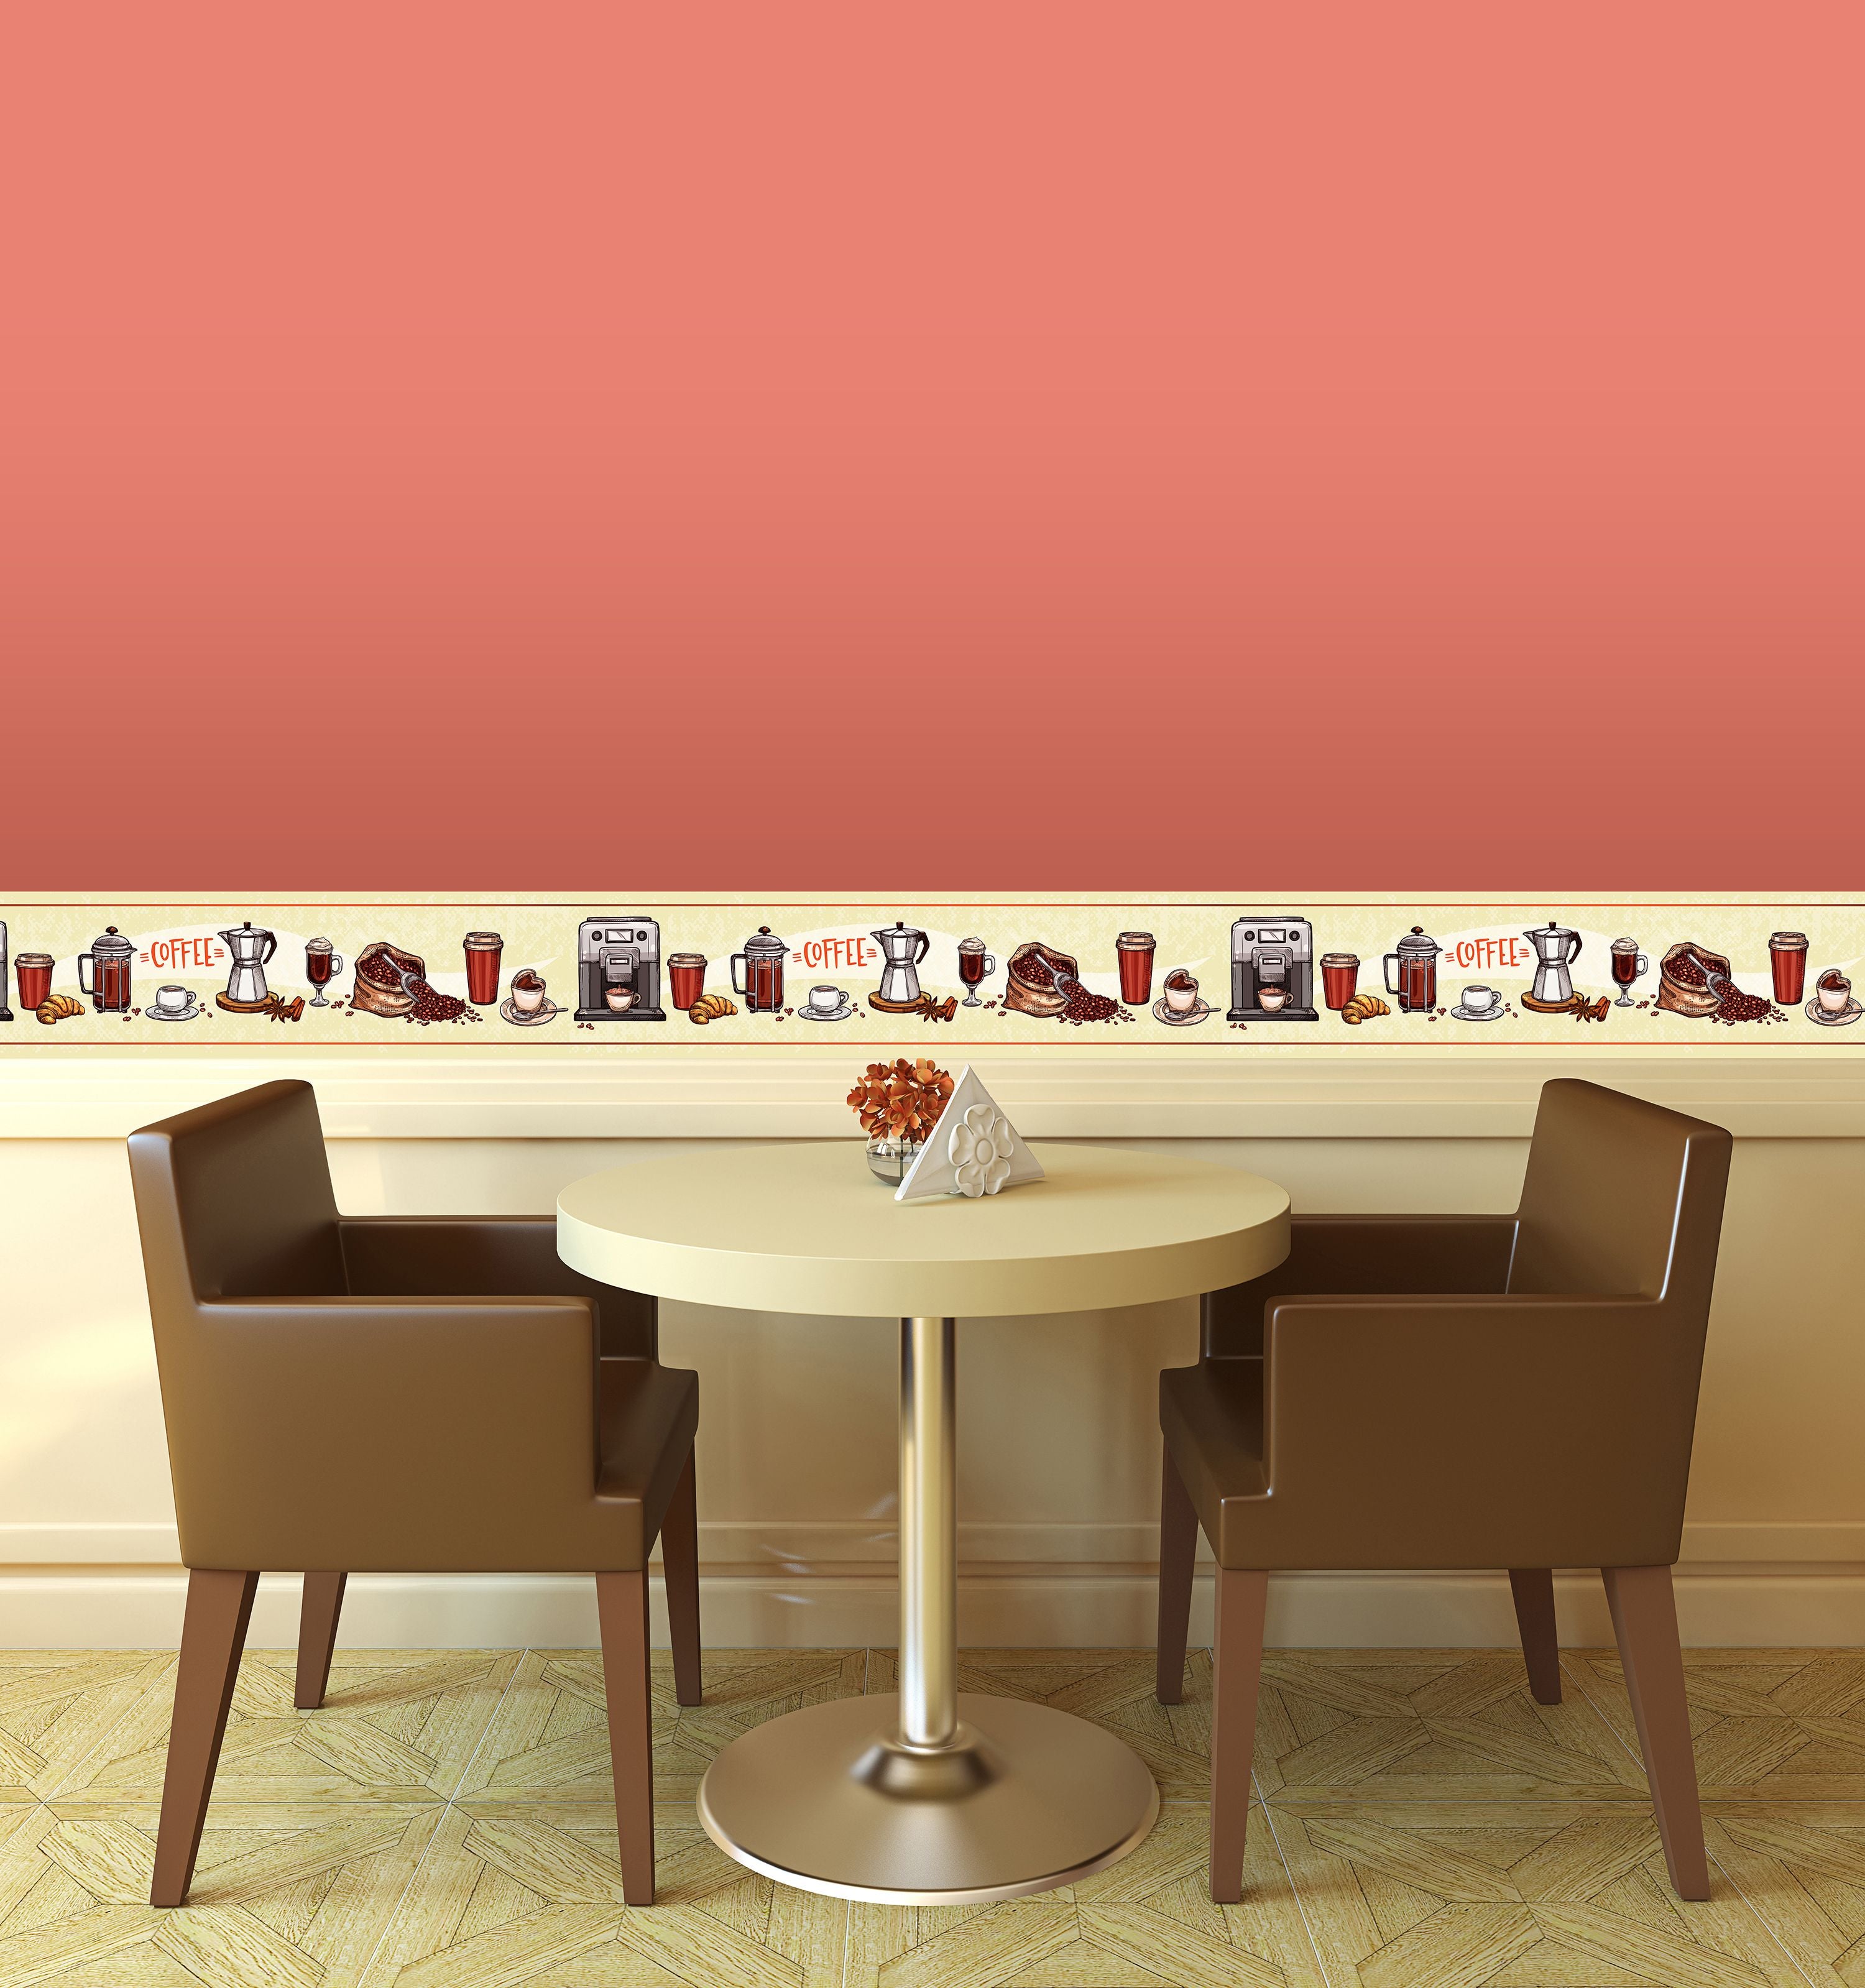 GB80021 Coffee Items Peel and Stick Wallpaper Border 10in Height x 18ft Yellow/Orange/Burgundy